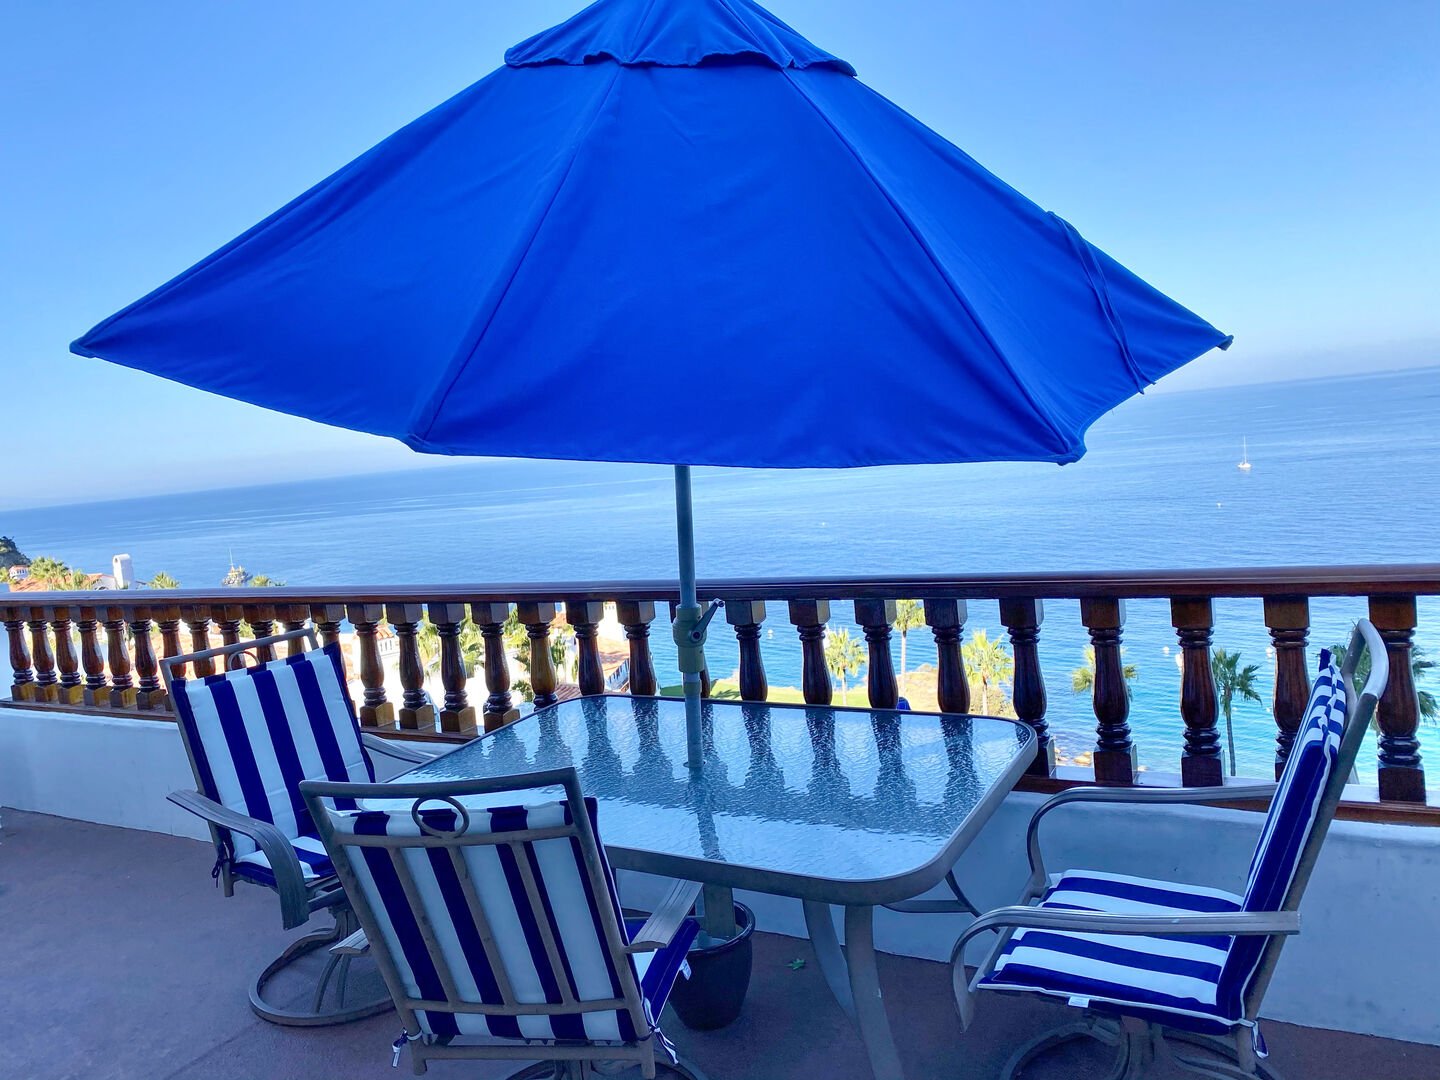 Relax to the sounds of the ocean on your private balcony